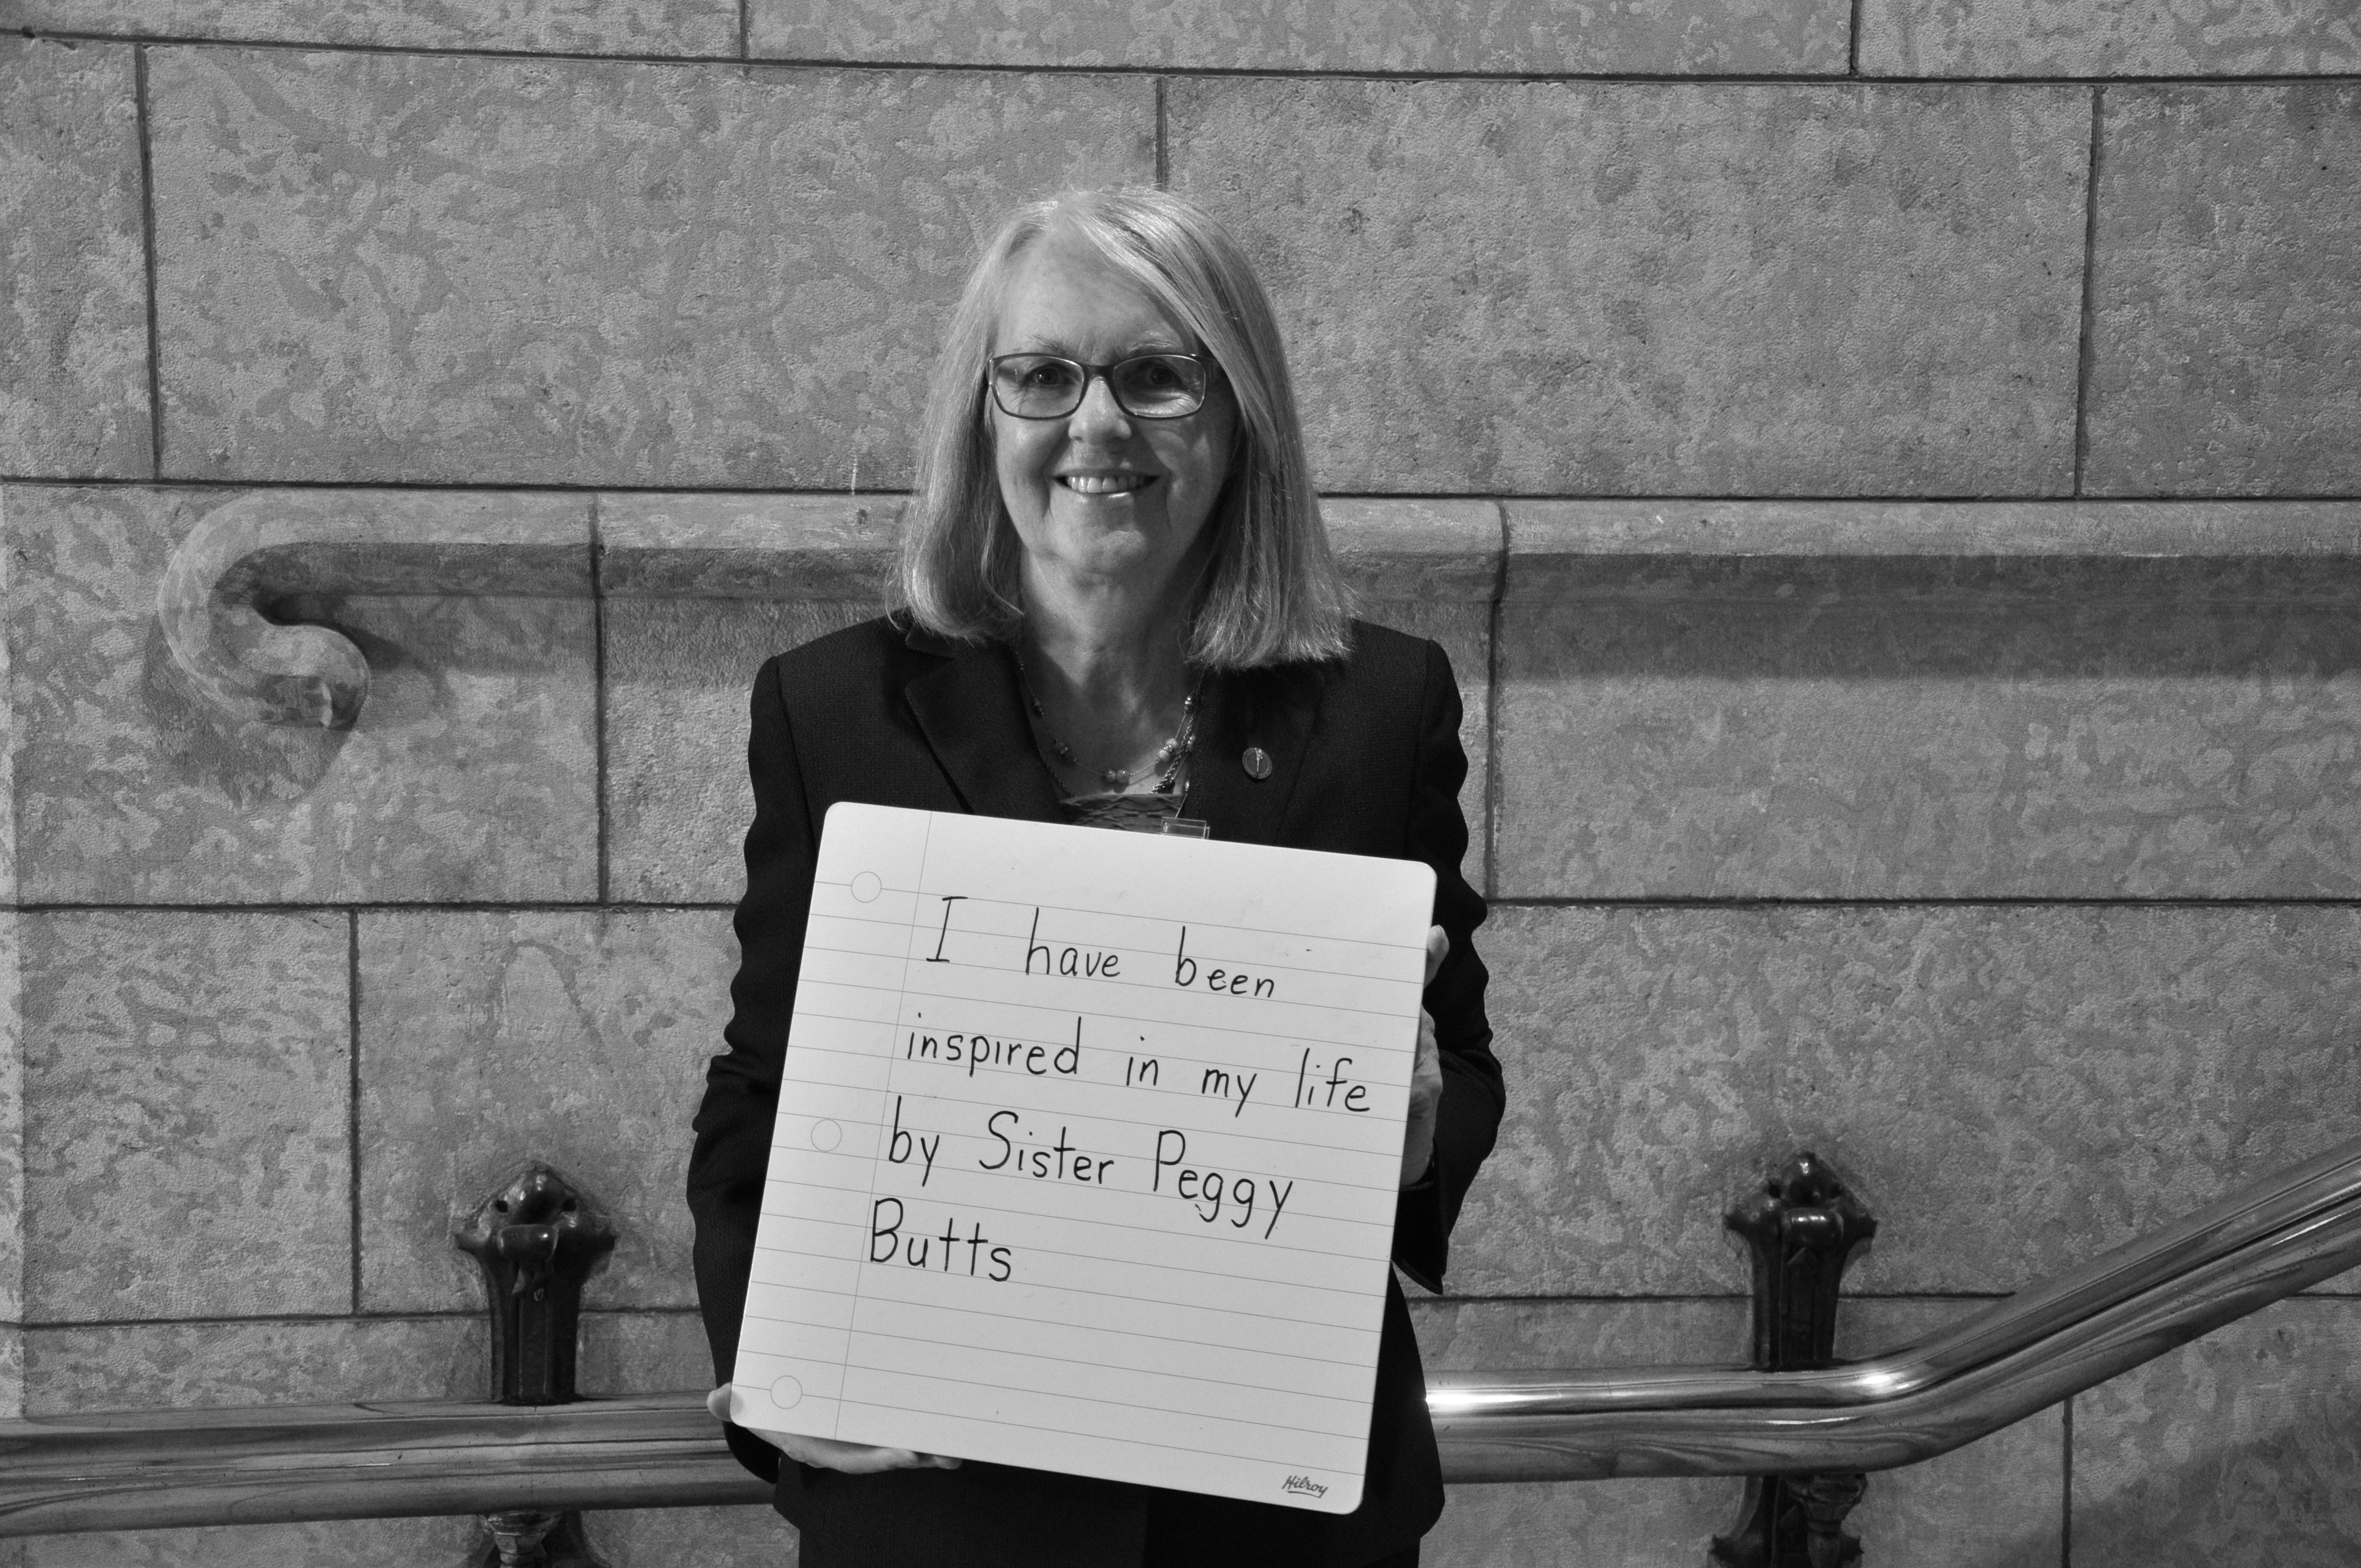 Senator Jane Cordy is inspired by Sister Peggy Butts.